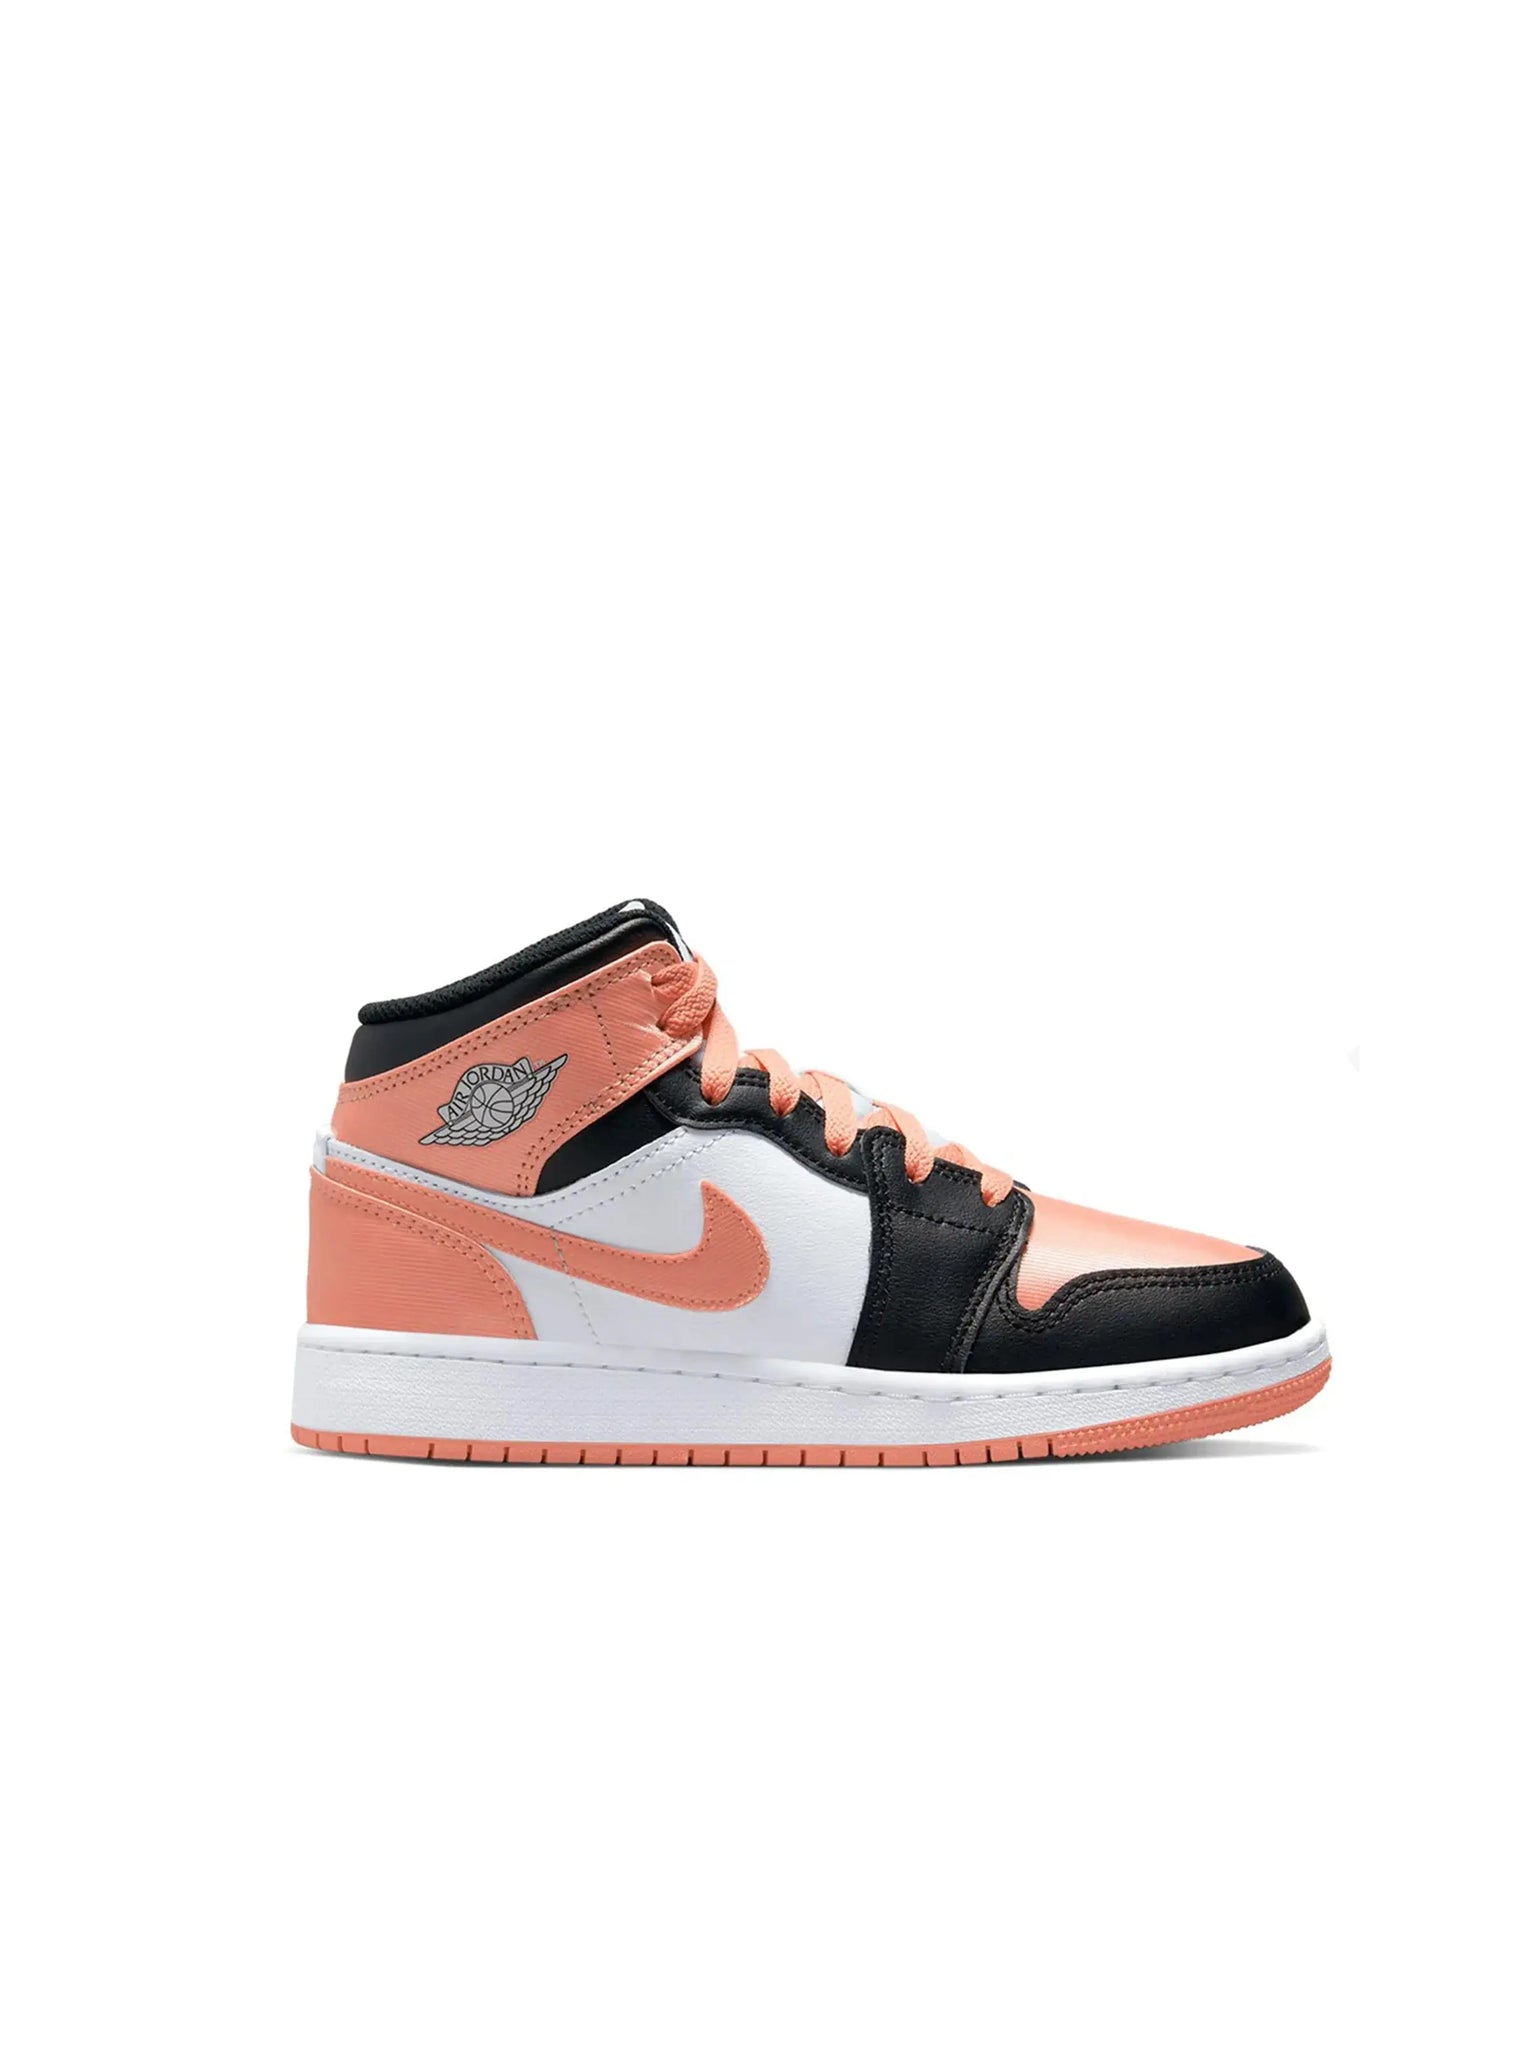 Nike Air Jordan 1 Mid Madder Root (GS) in Auckland, New Zealand - Shop name